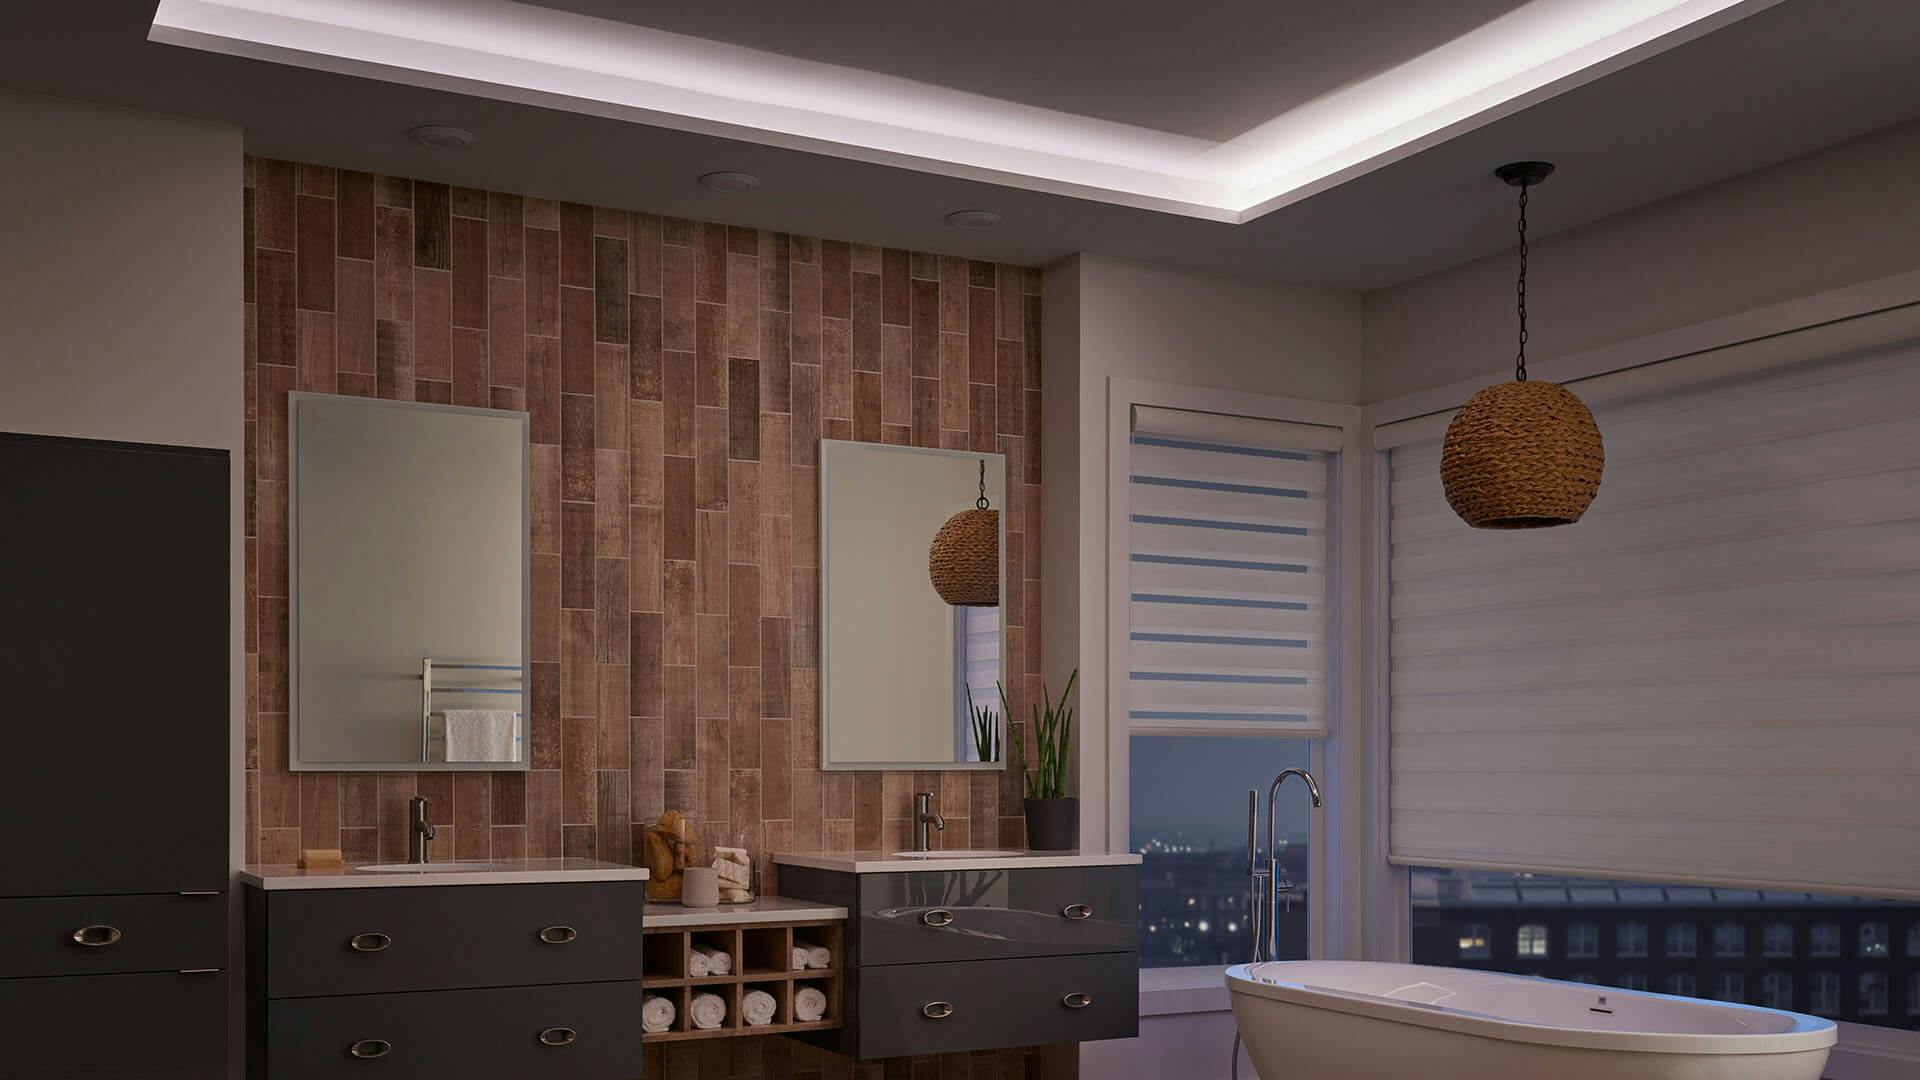 Bathroom lit by tape lighting along the ceiling alcove